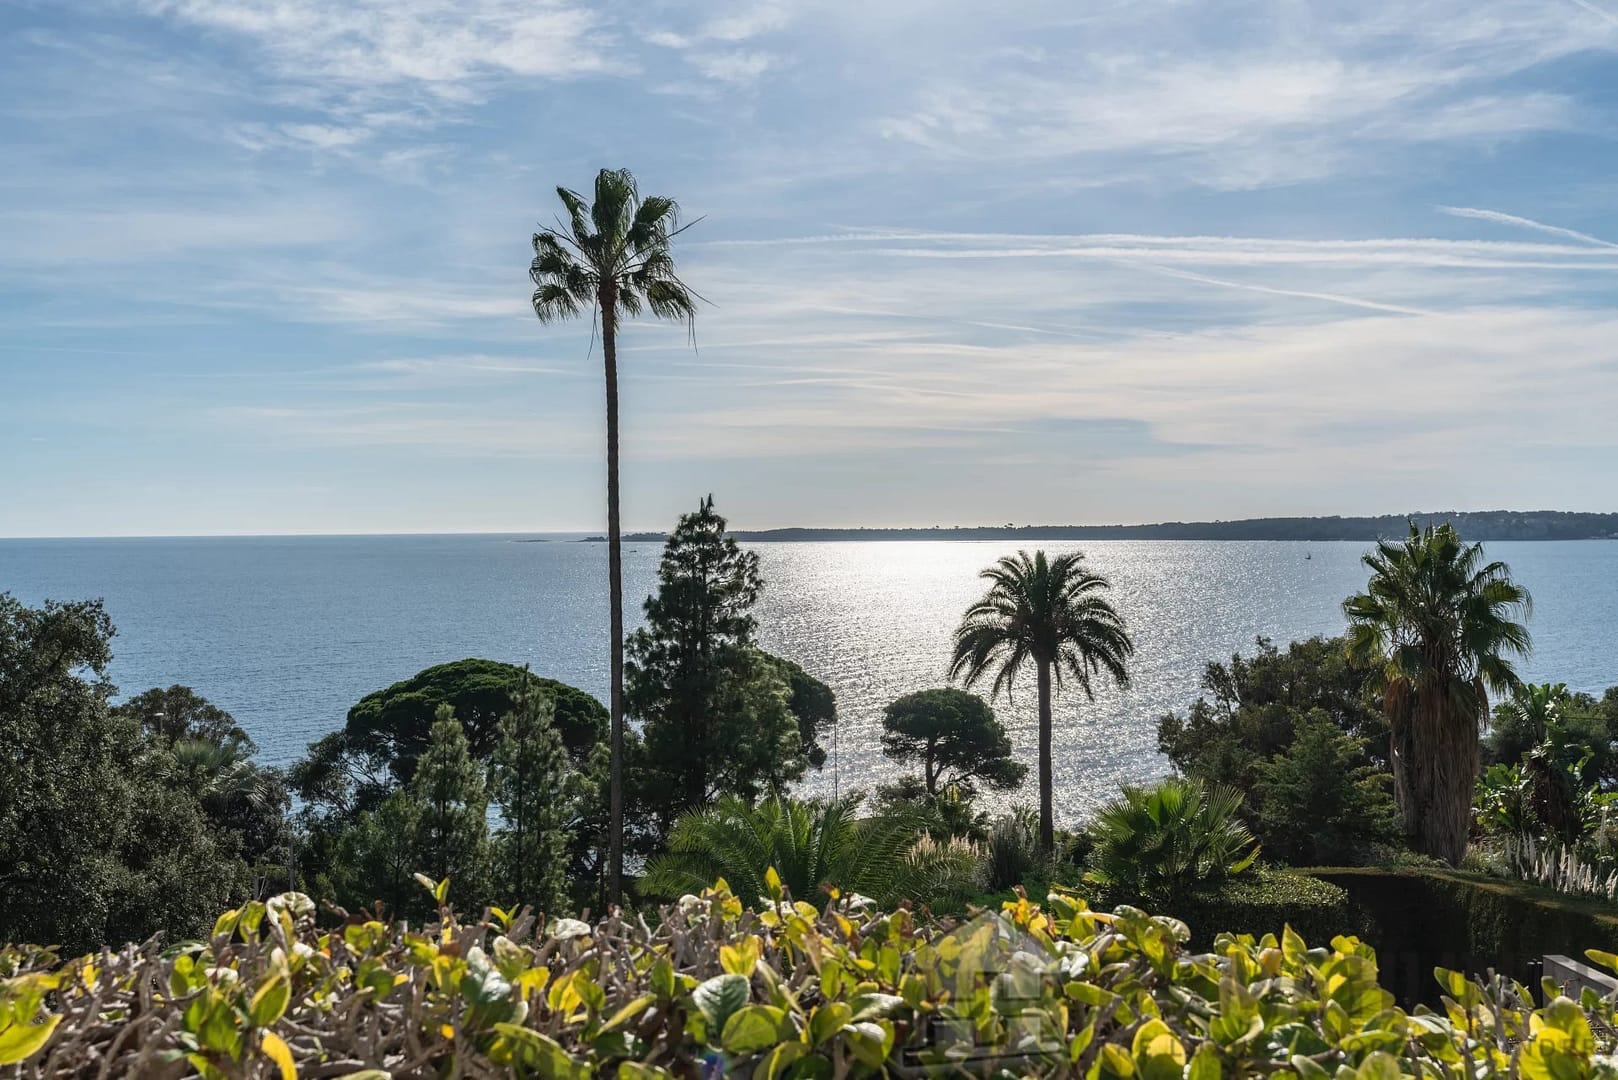 4 Bedroom Apartment in Cannes 5